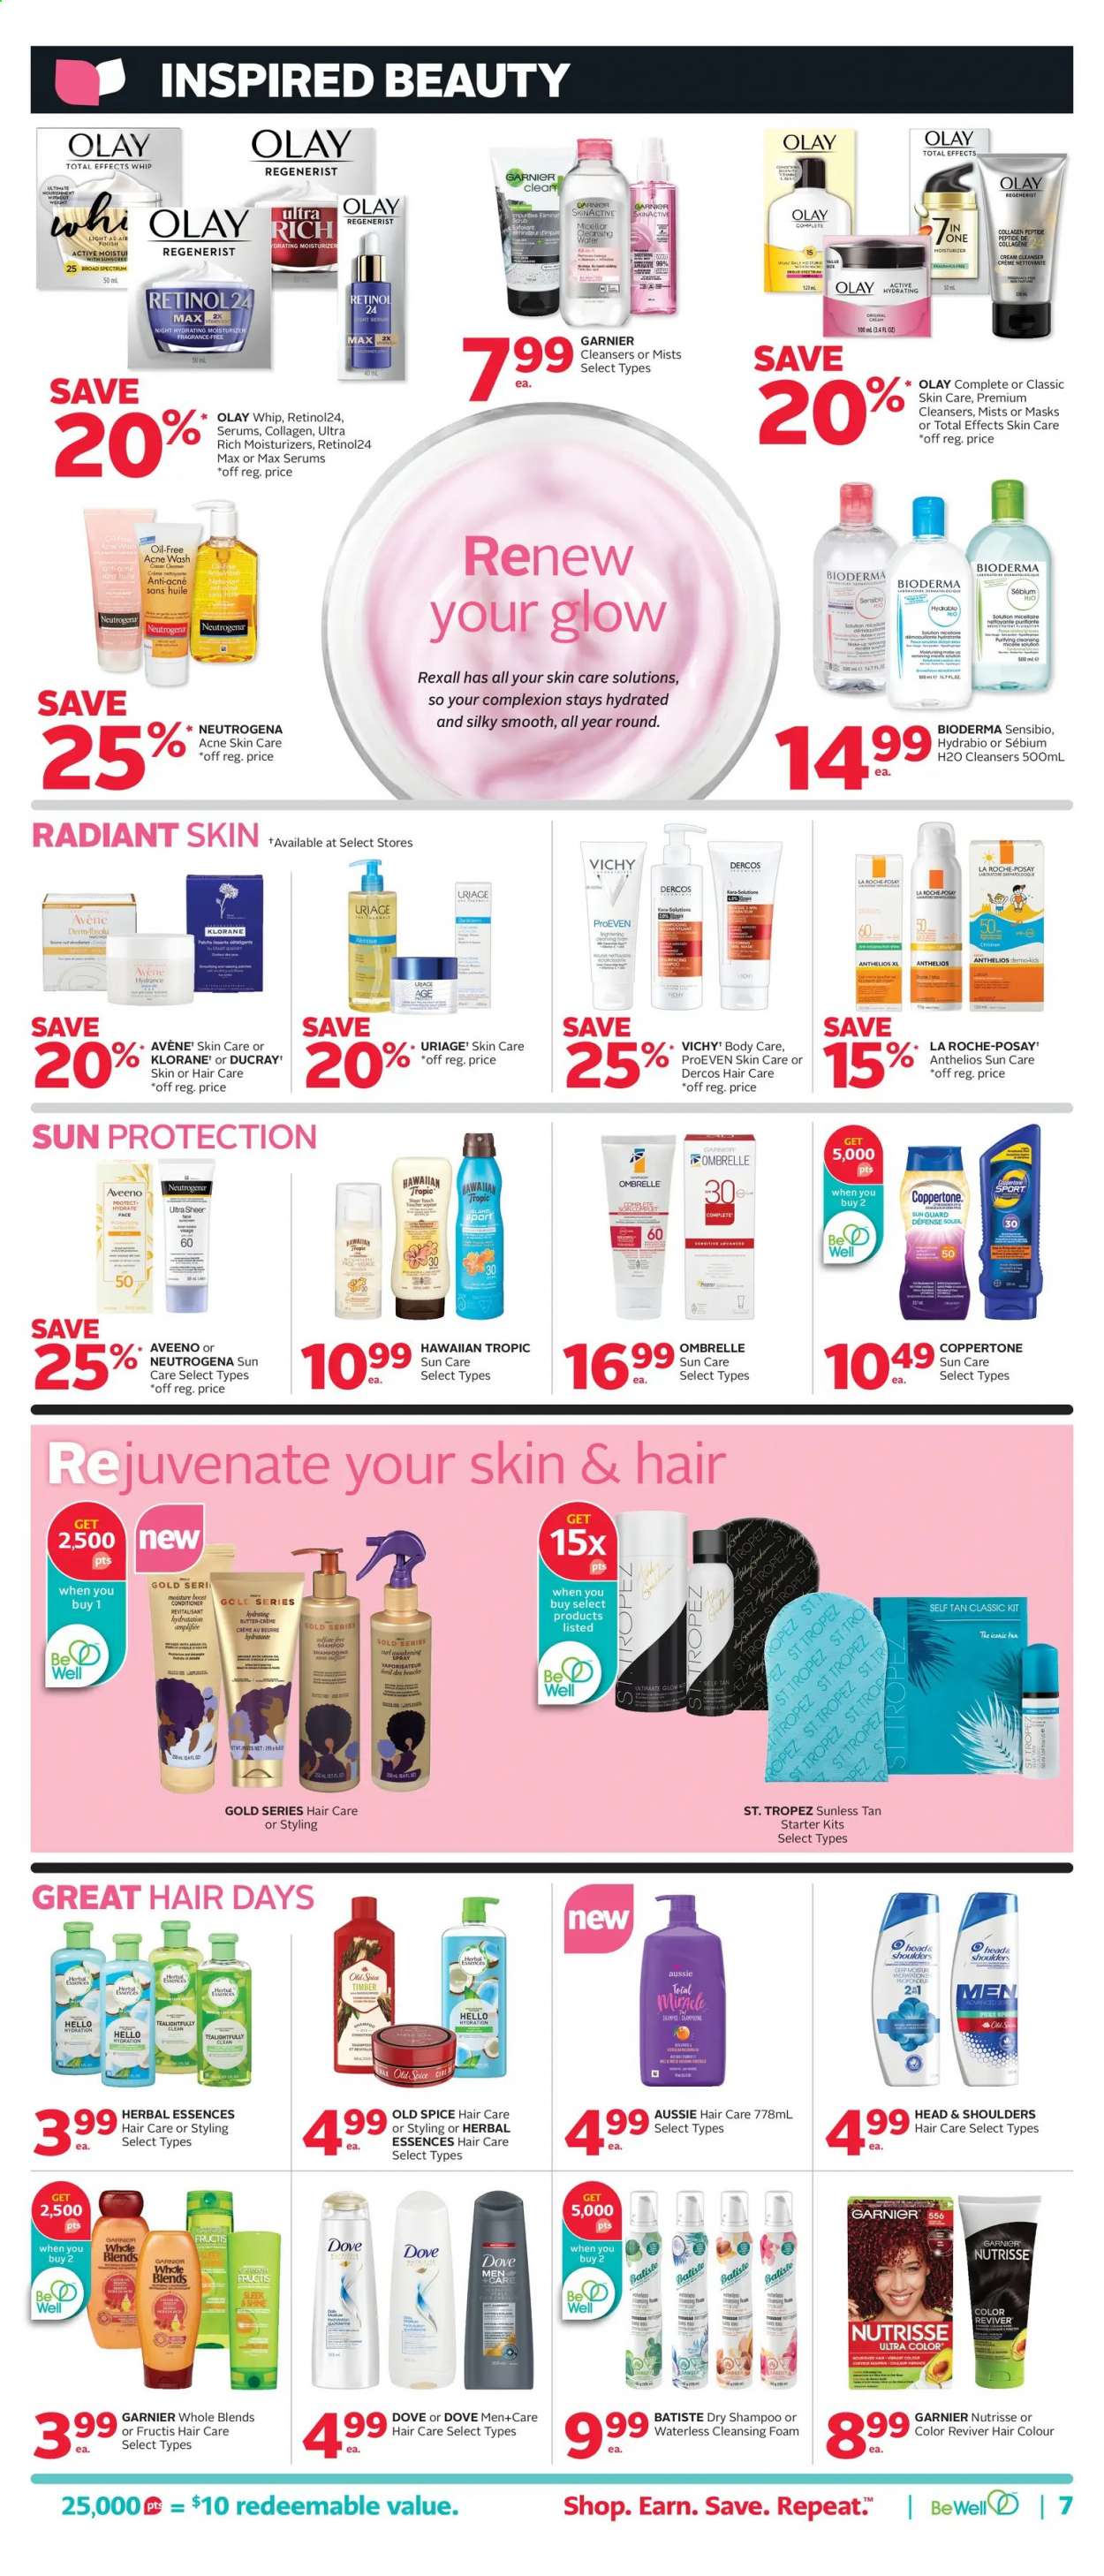 thumbnail - Circulaire Rexall - 16 Avril 2021 - 22 Avril 2021 - Produits soldés - Avéne, Ducray, Finish, Fructis, huile, Uriage, shampooing, Klorane, Dove, Garnier, Head & Shoulders, Vichy, La Roche-Posay, Neutrogena, Old Spice. Page 7.